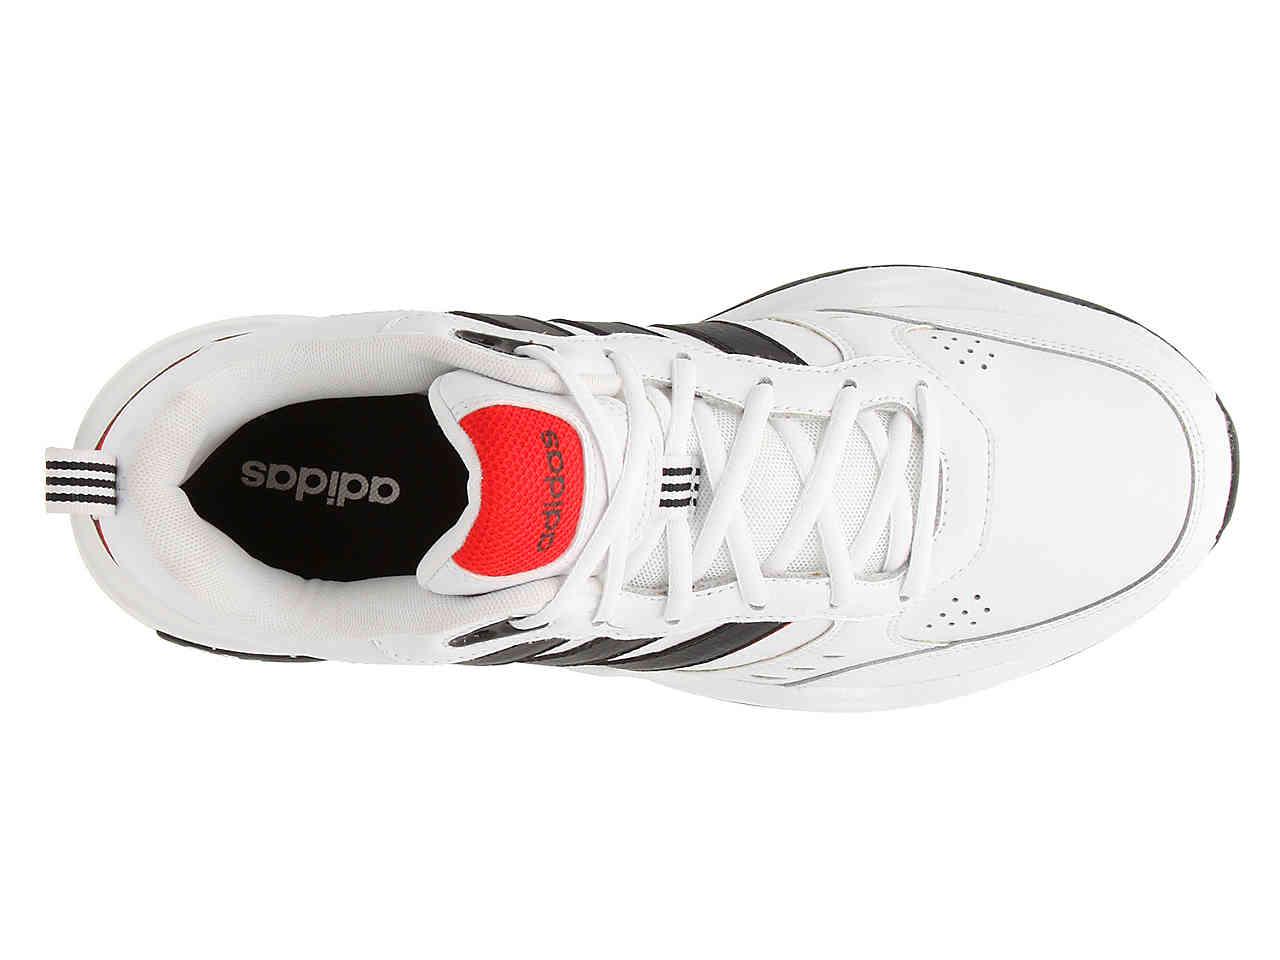 adidas Leather Strutter Training Shoe in White/Red/Black (White) for ...